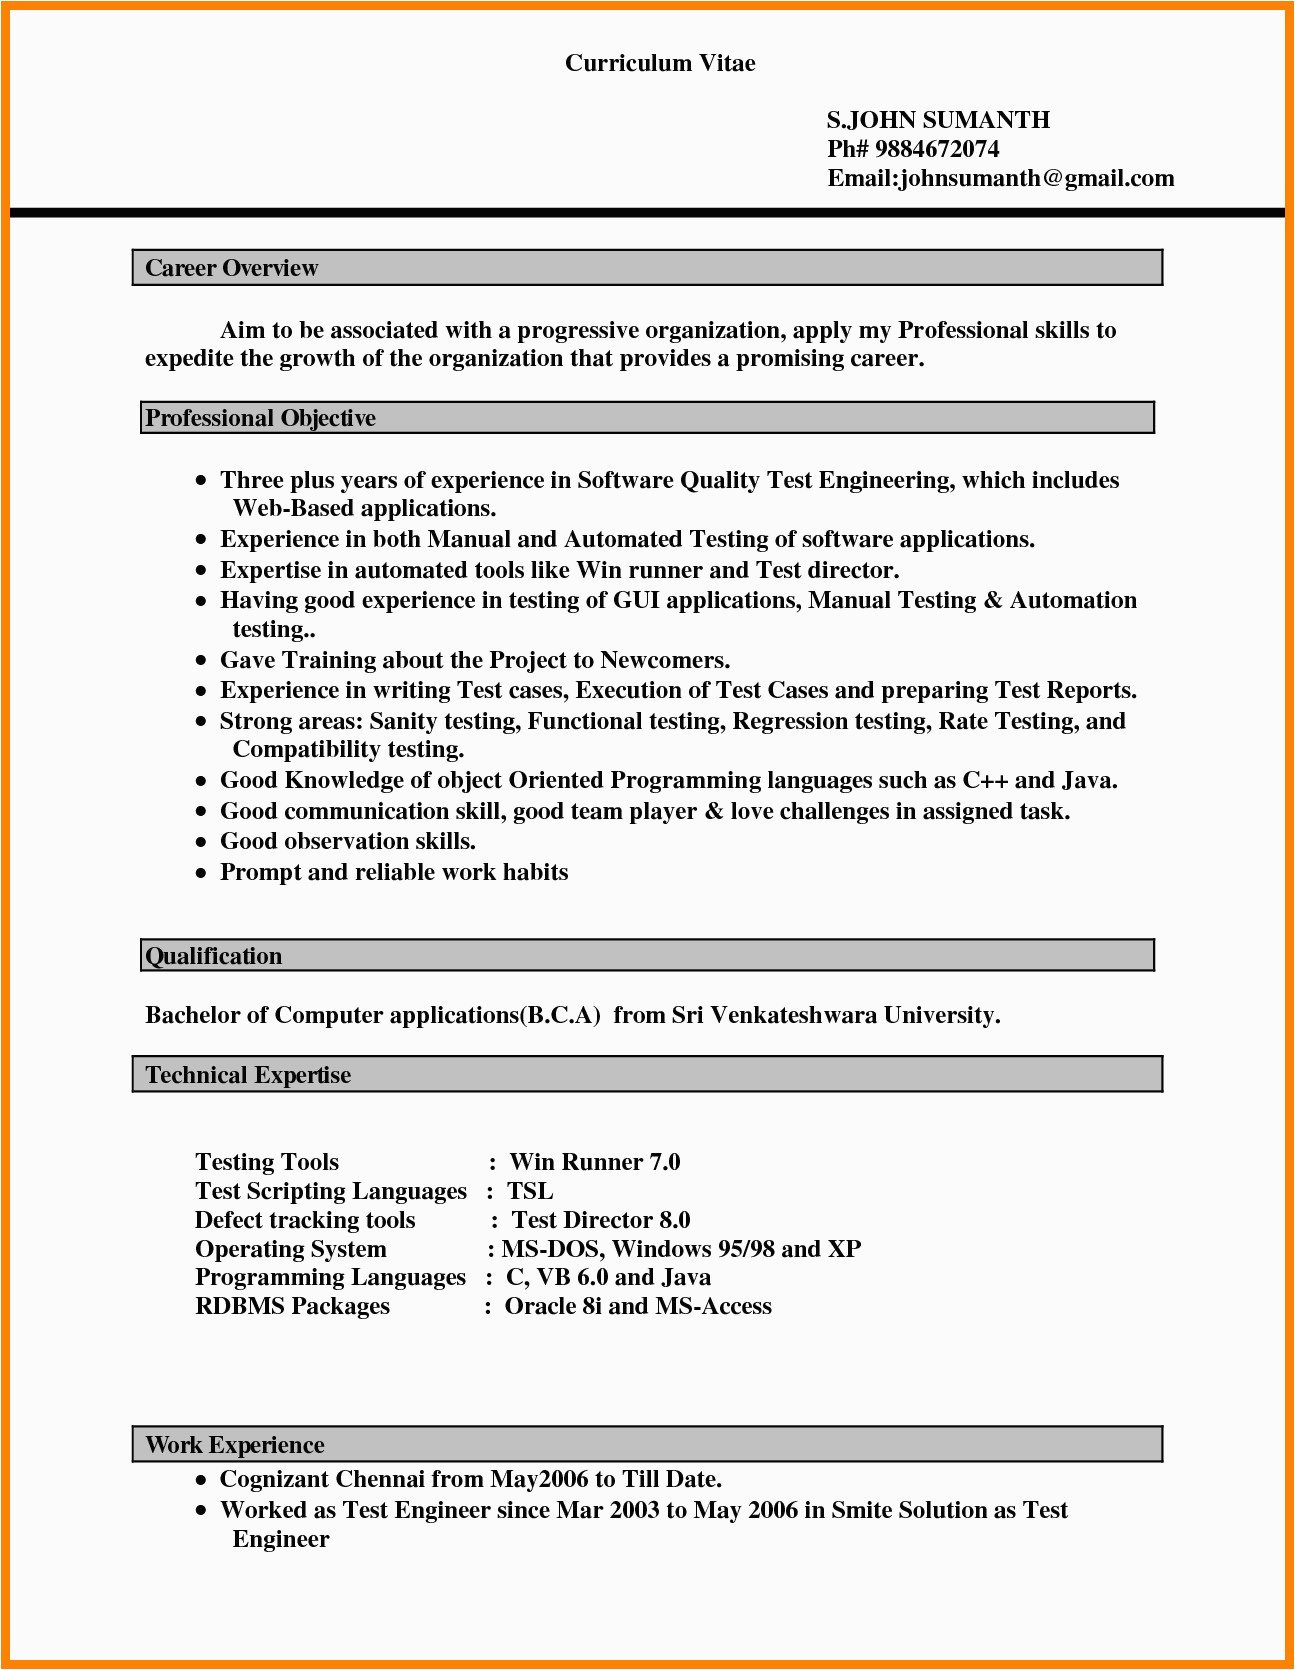 Sample Resume for Ms In Us with Work Experience Latest Resume format In Ms Word